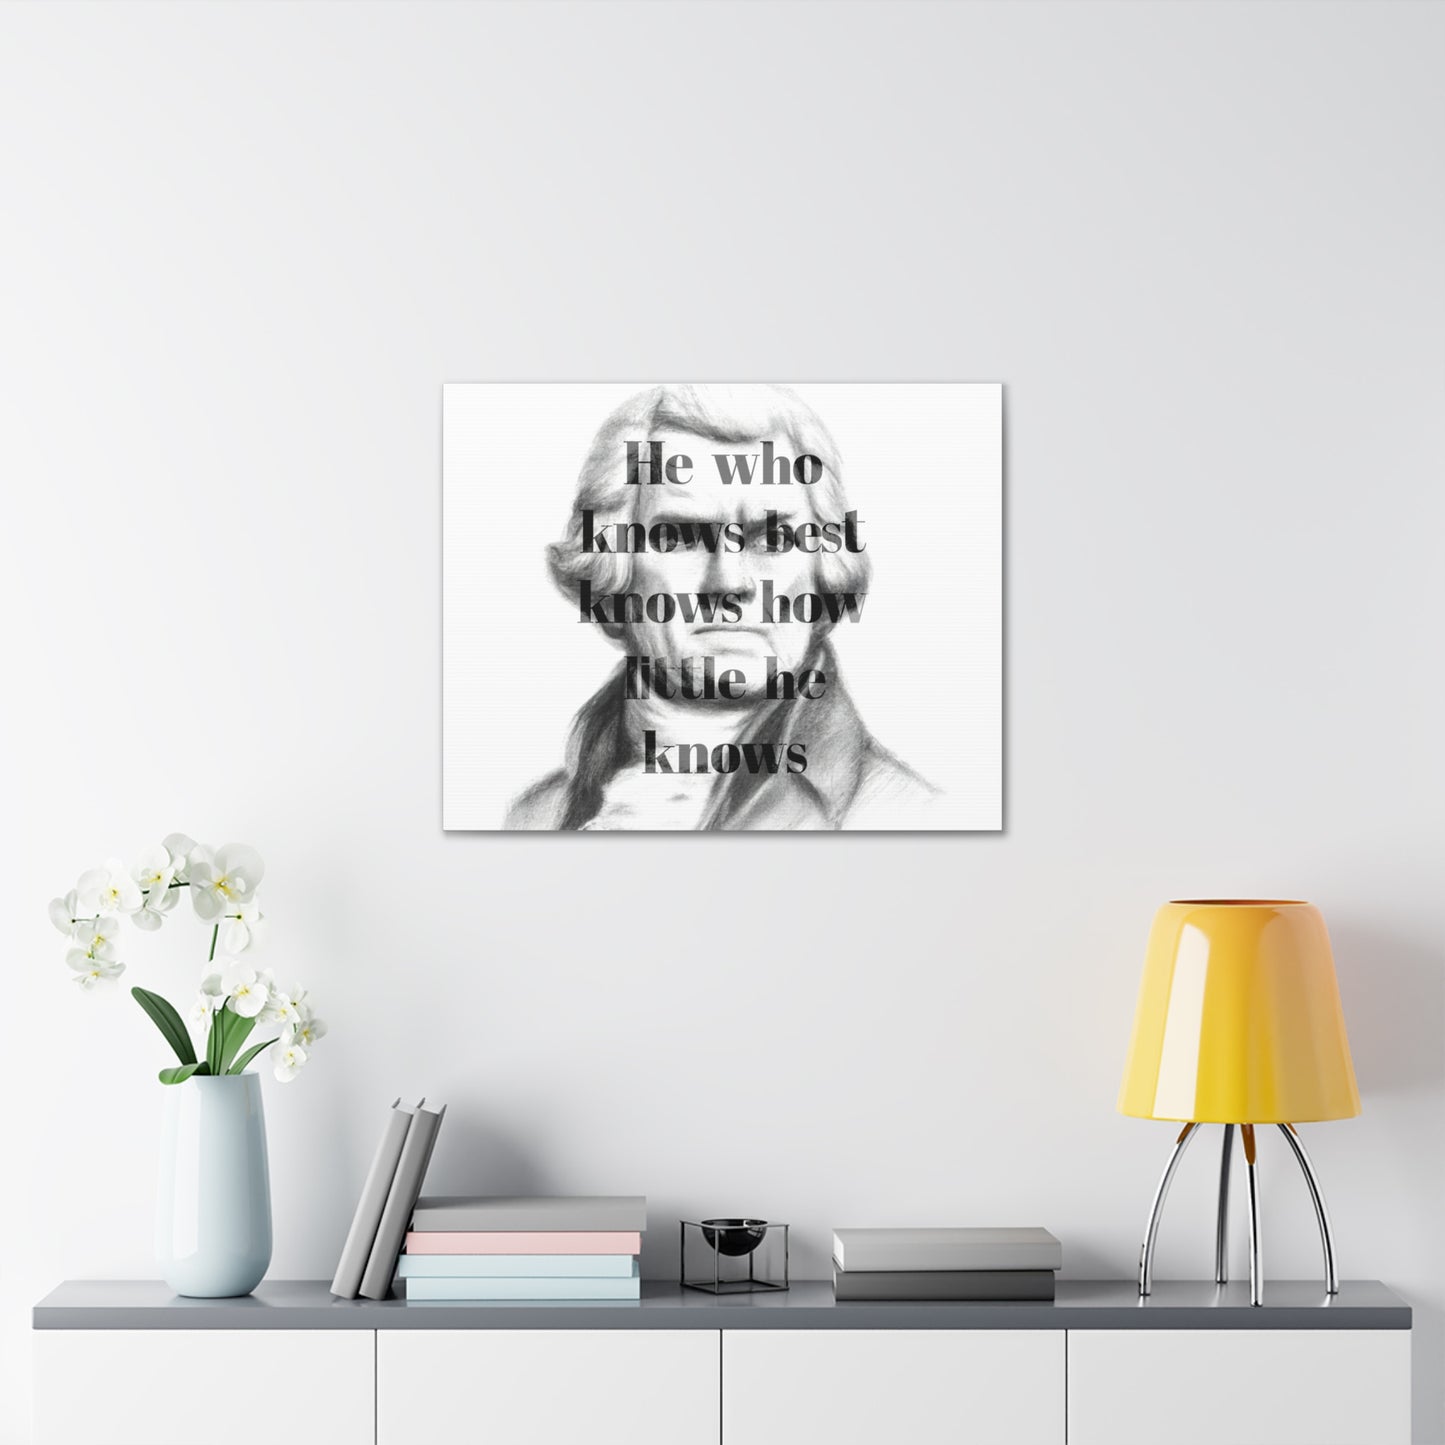 Thomas Jefferson Quote 5, Canvas Art, Horizontal Light Print, 3rd President of the United States, Political Art, Canvas Prints, Presidential Quotes, Inspirational Quotes